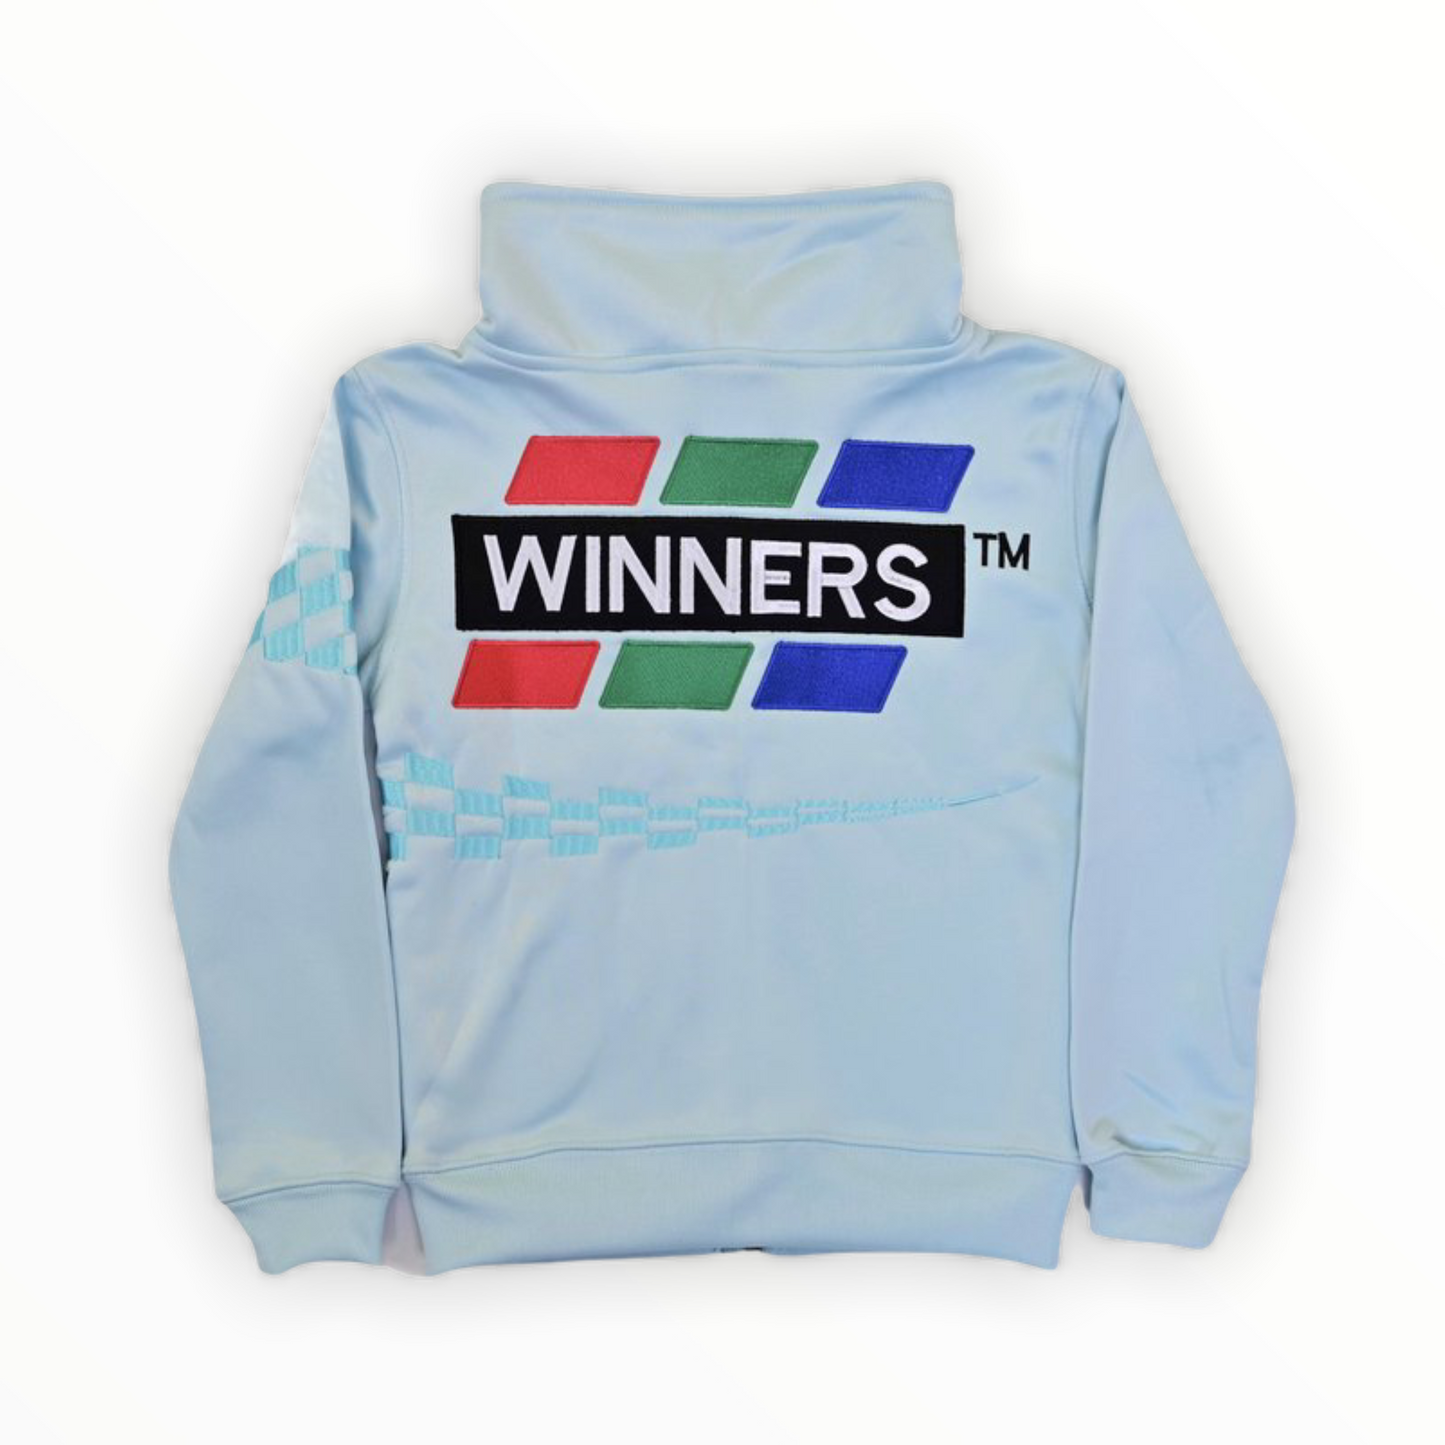 Winners Checkered Track Set Jacket - Baby Blue